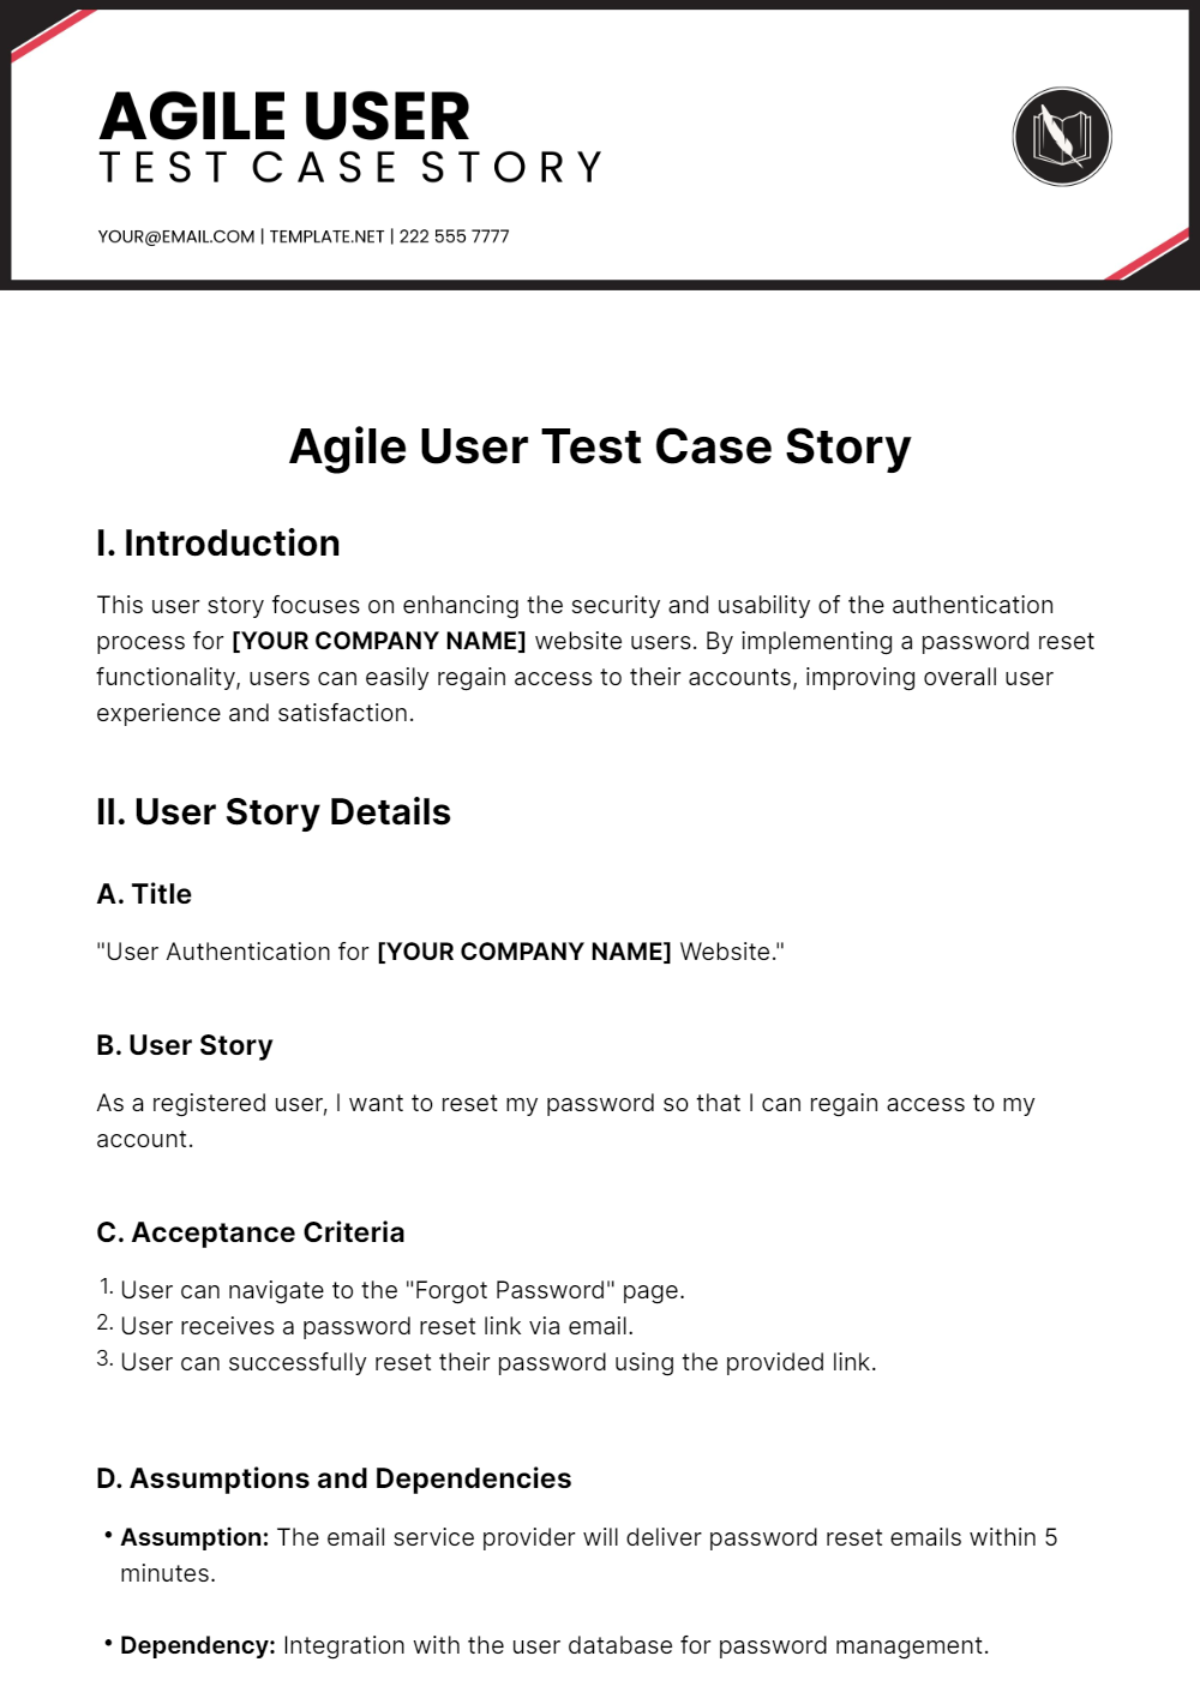 Agile User Test Case Story Template